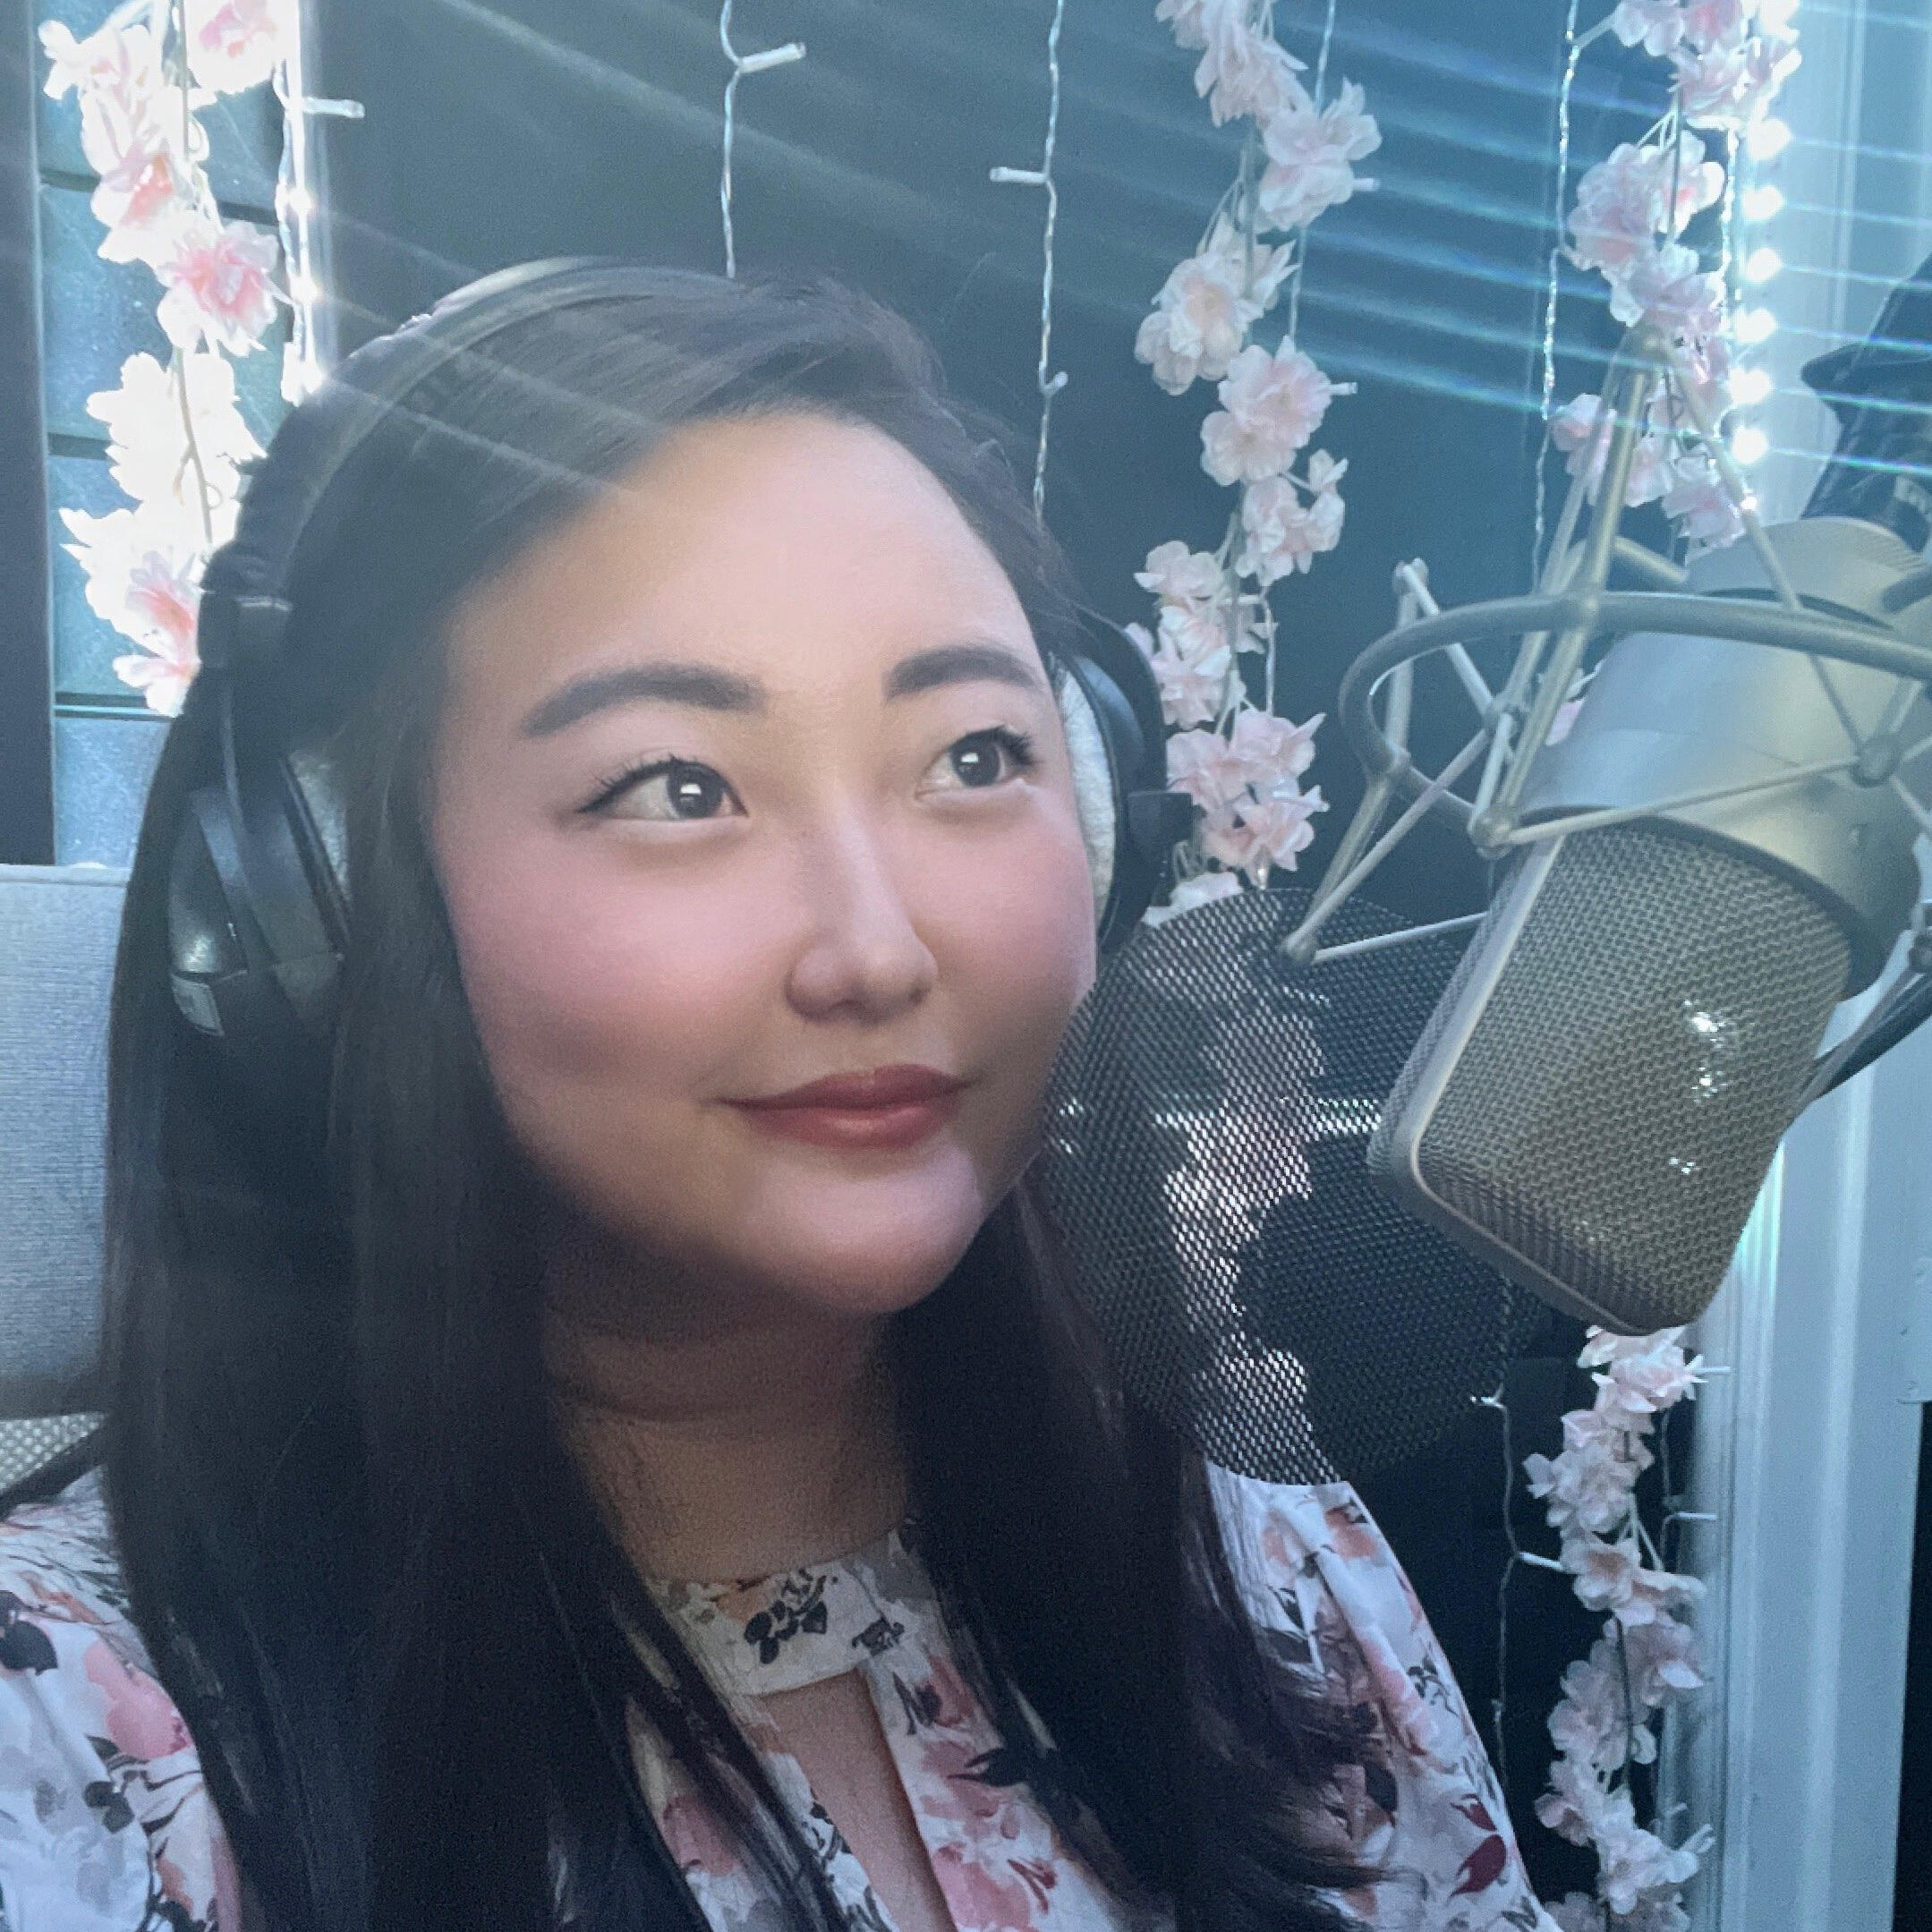 Voice actress Molly Zhang recording. Photo Credit: Provided by Molly Zhang